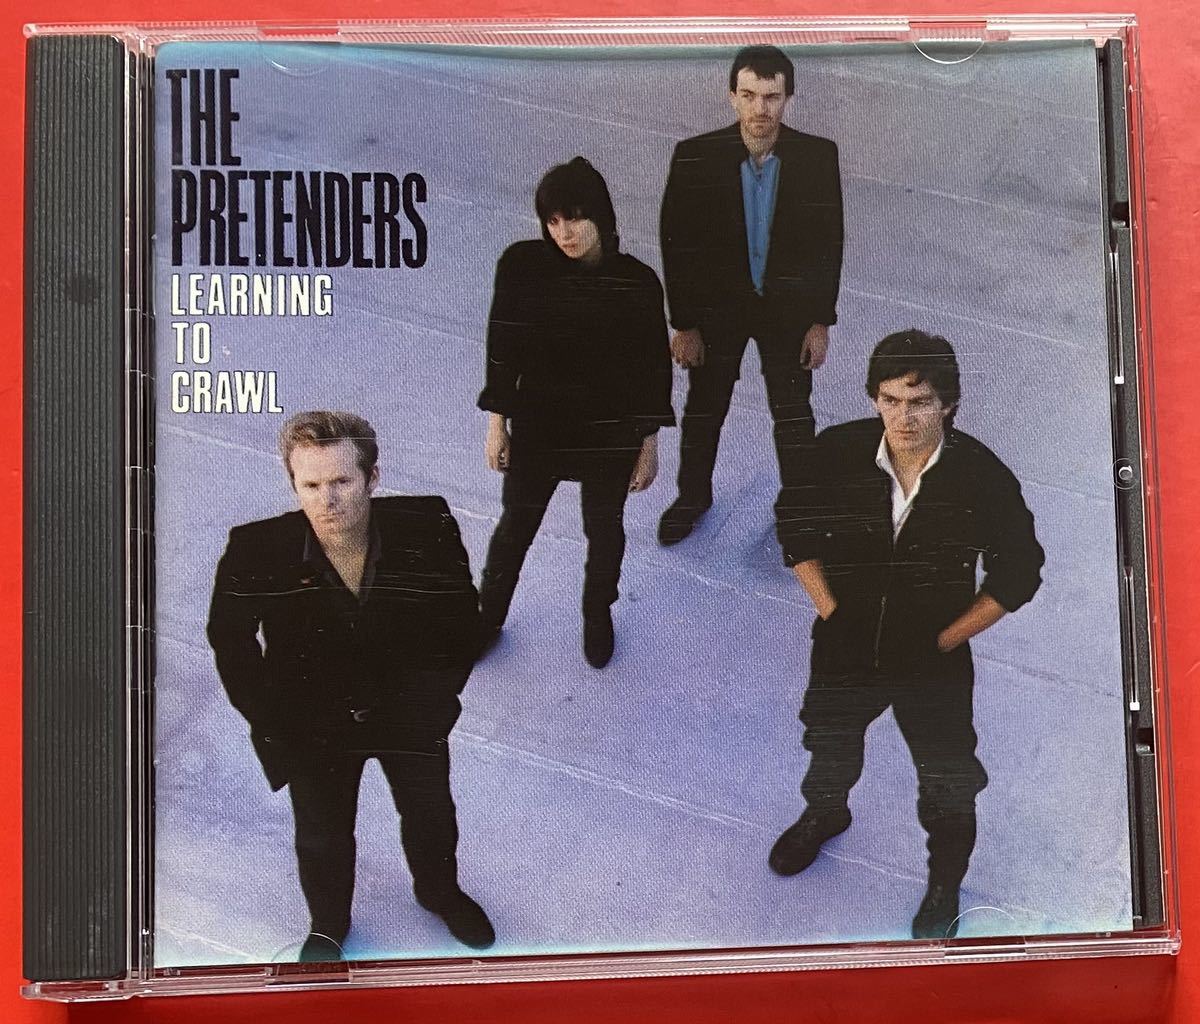 【CD】PRETENDERS「LEARNING TO CRAWL」プリテンダーズ 輸入盤 [06250296]_画像1